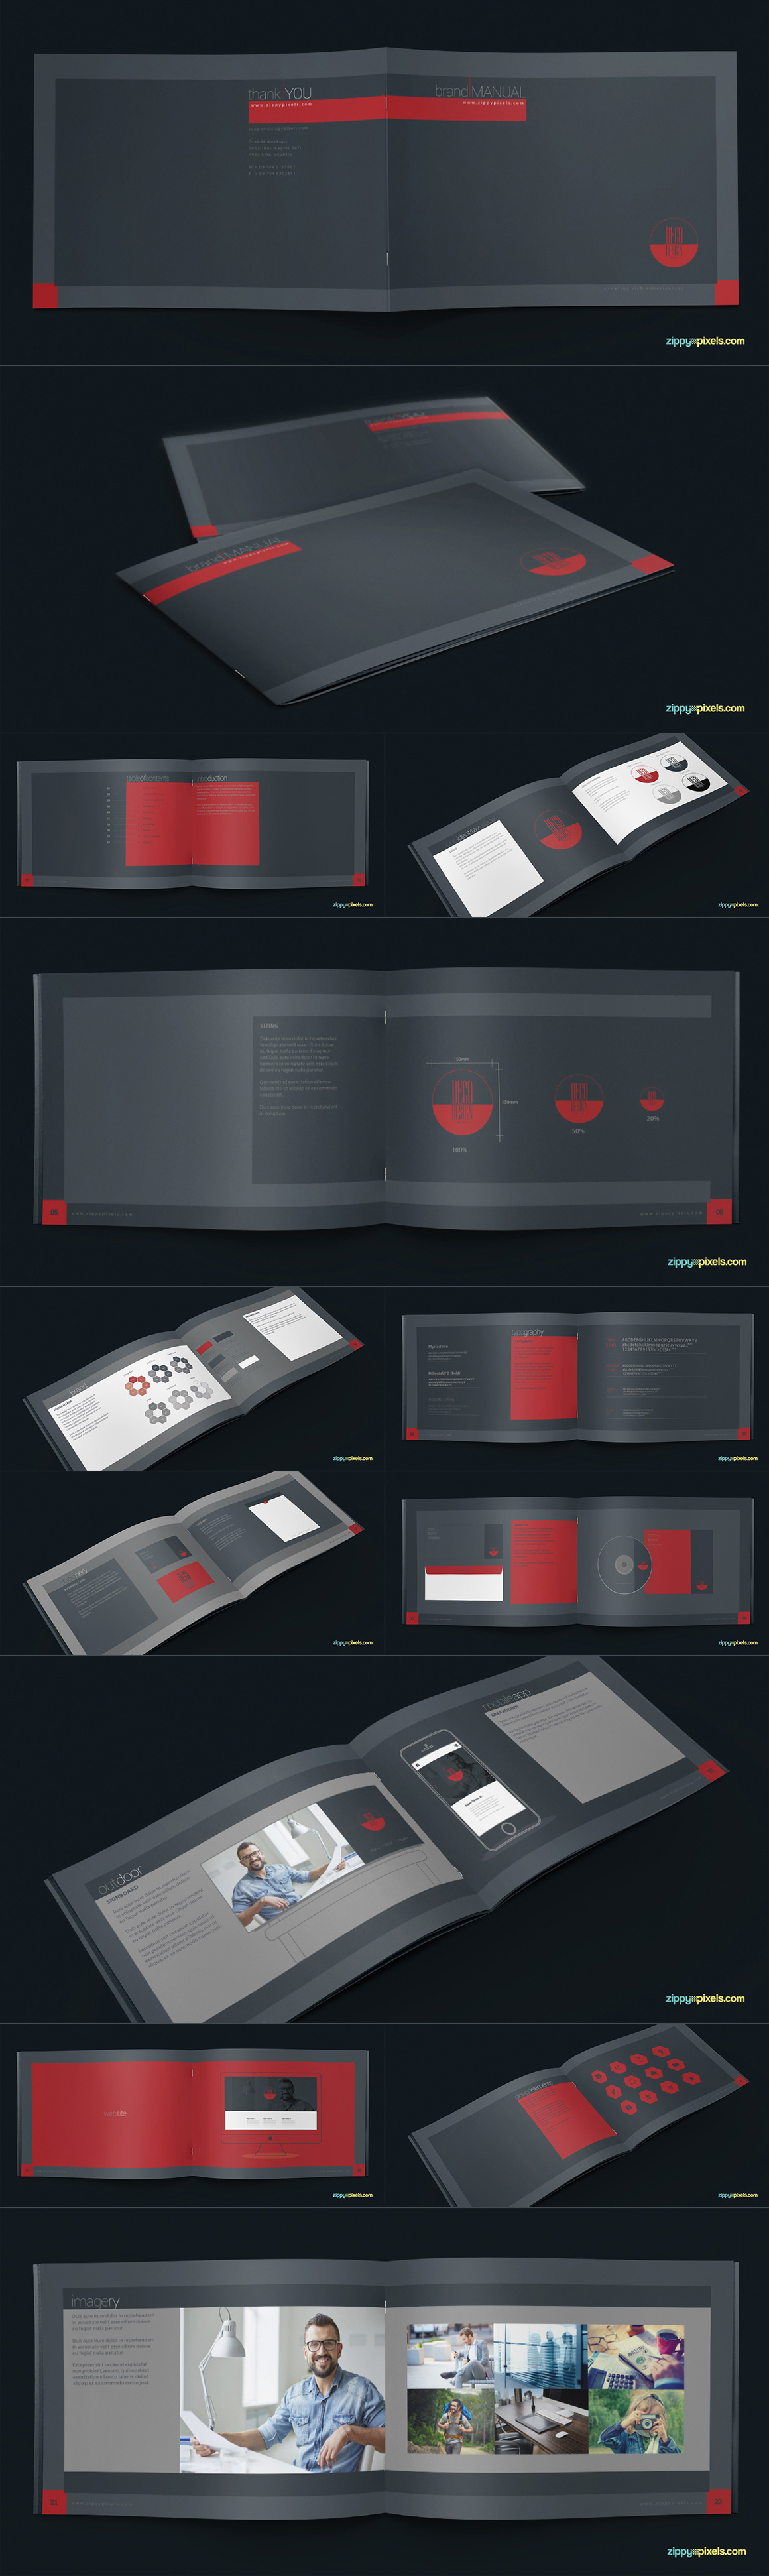 Style Guide & Brand Book Templates-strip1